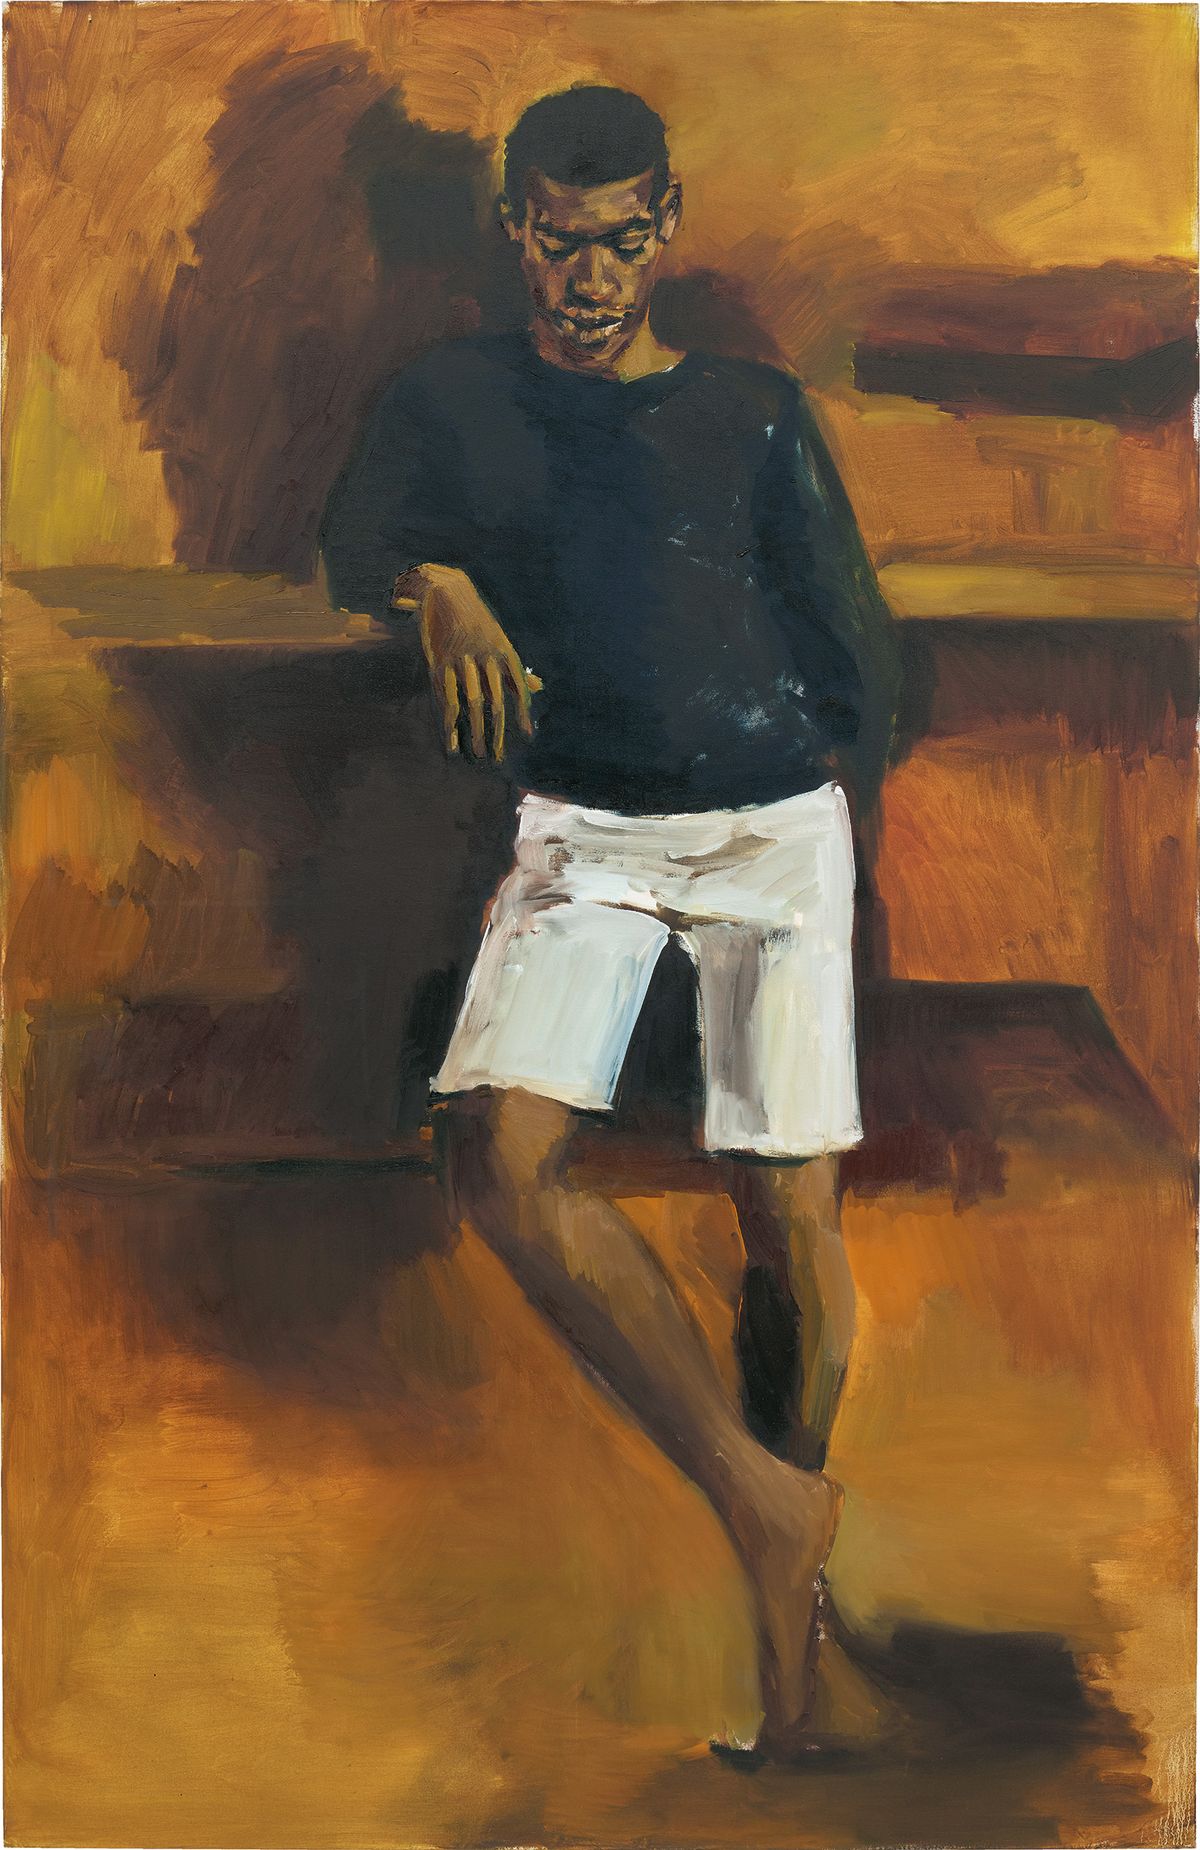 Lynette Yiadom-Boakye's Leave A Brick Under The Maple (2015) sold for £795,000. Courtesy of Phillips